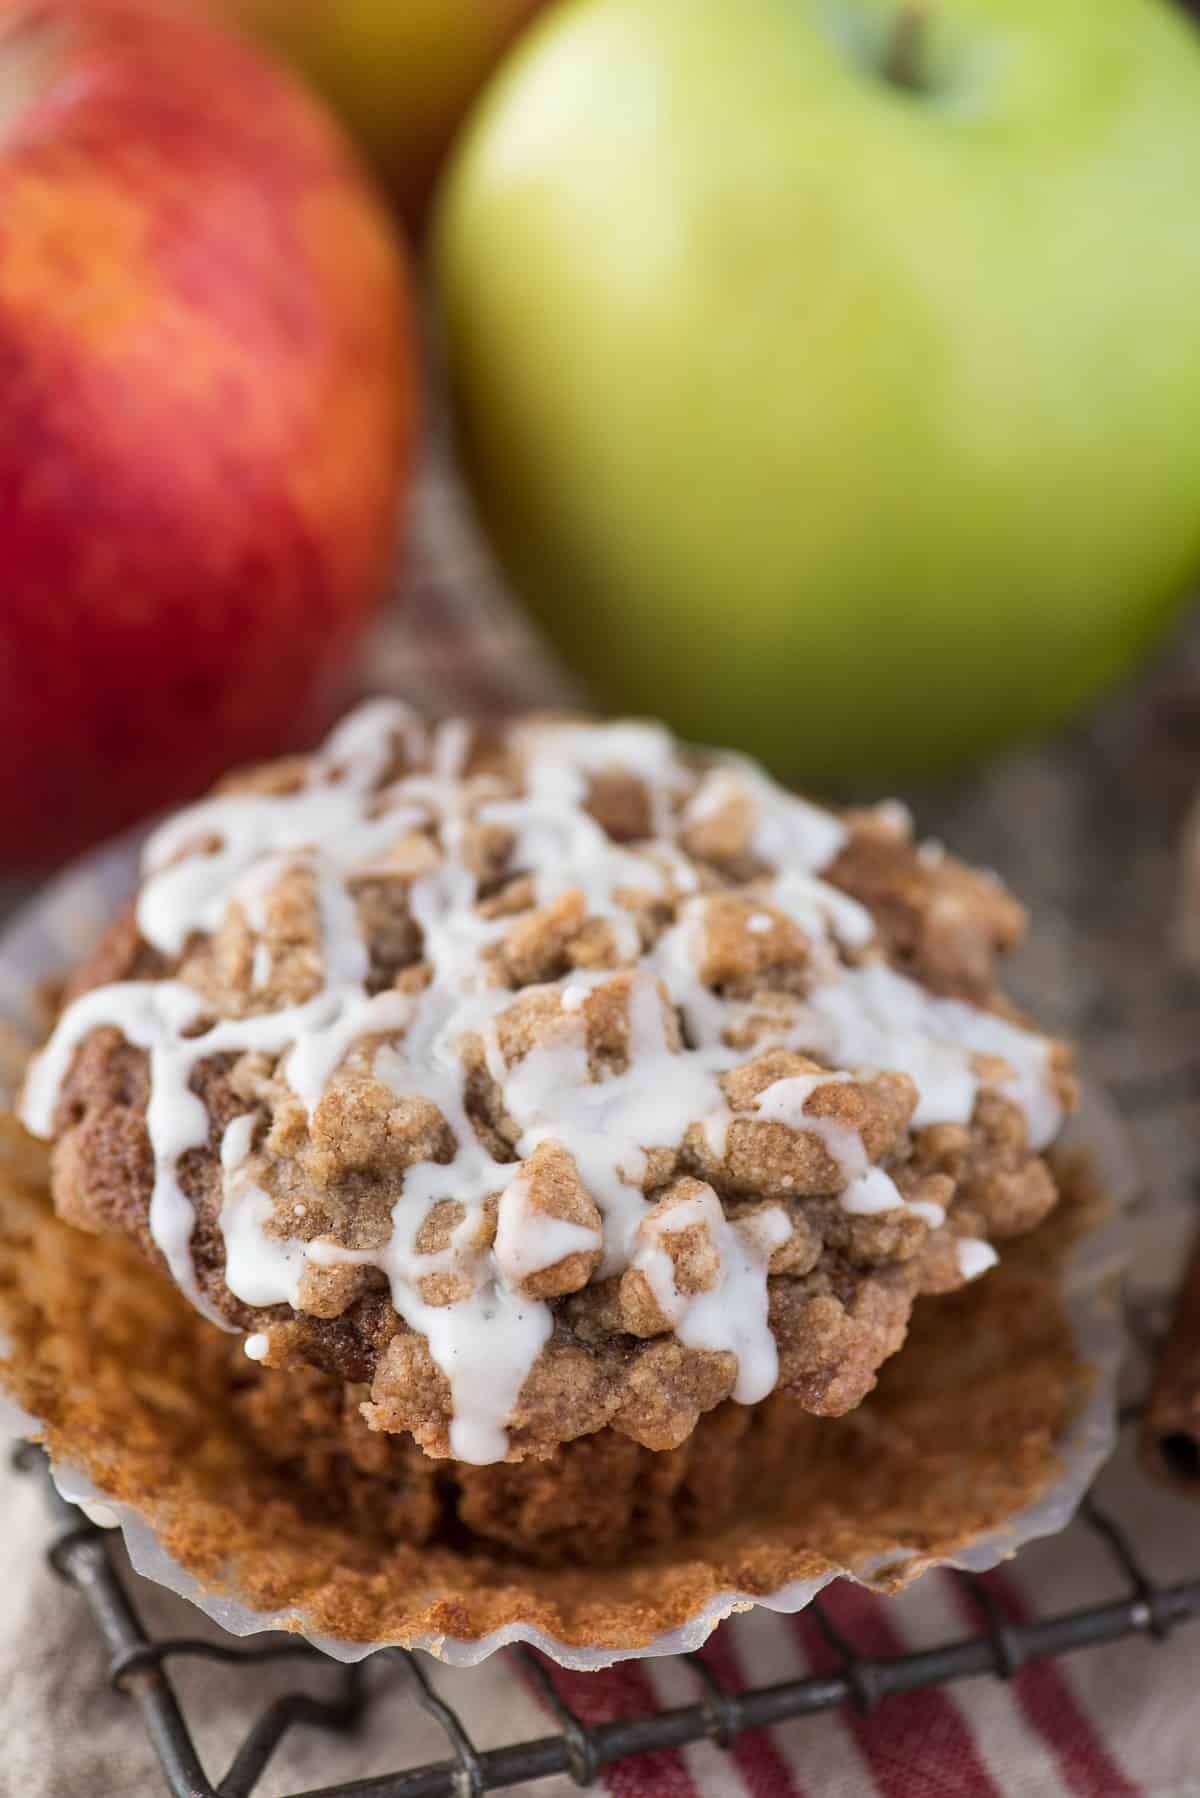 applesauce spice muffins with crumb topping and white glaze on wire rack and apples in the background